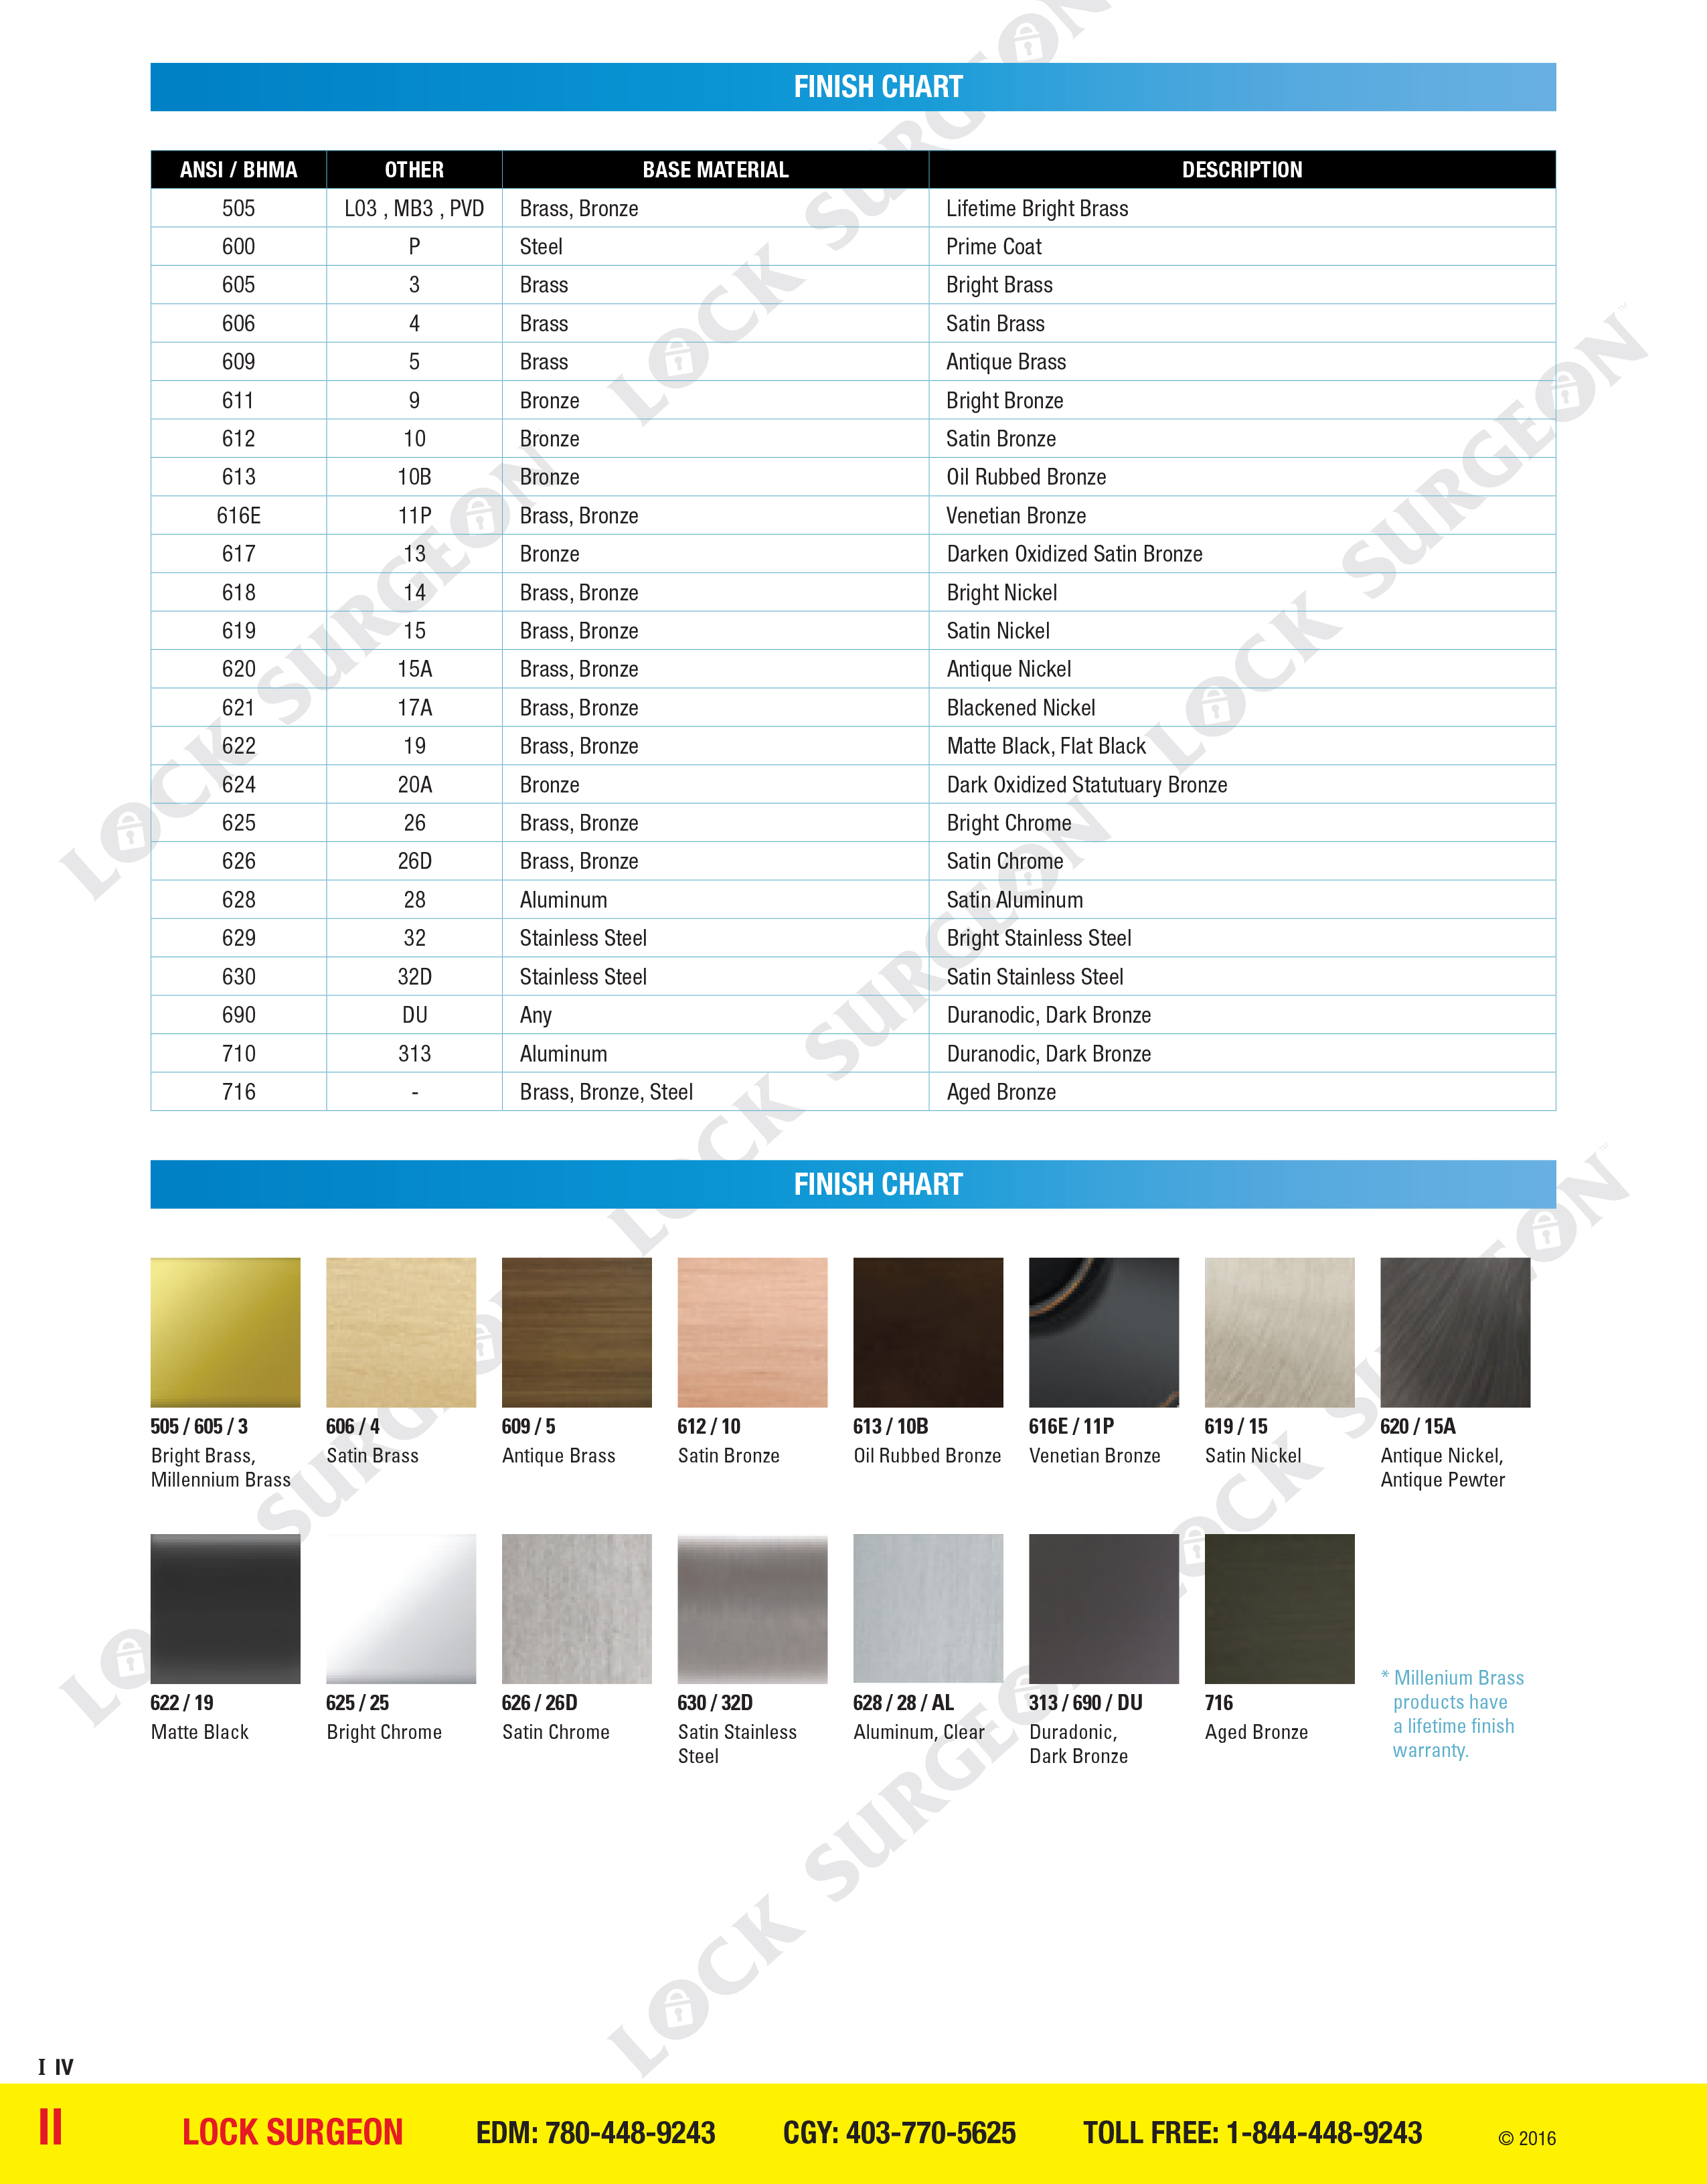 Colour finishes available in many styles.